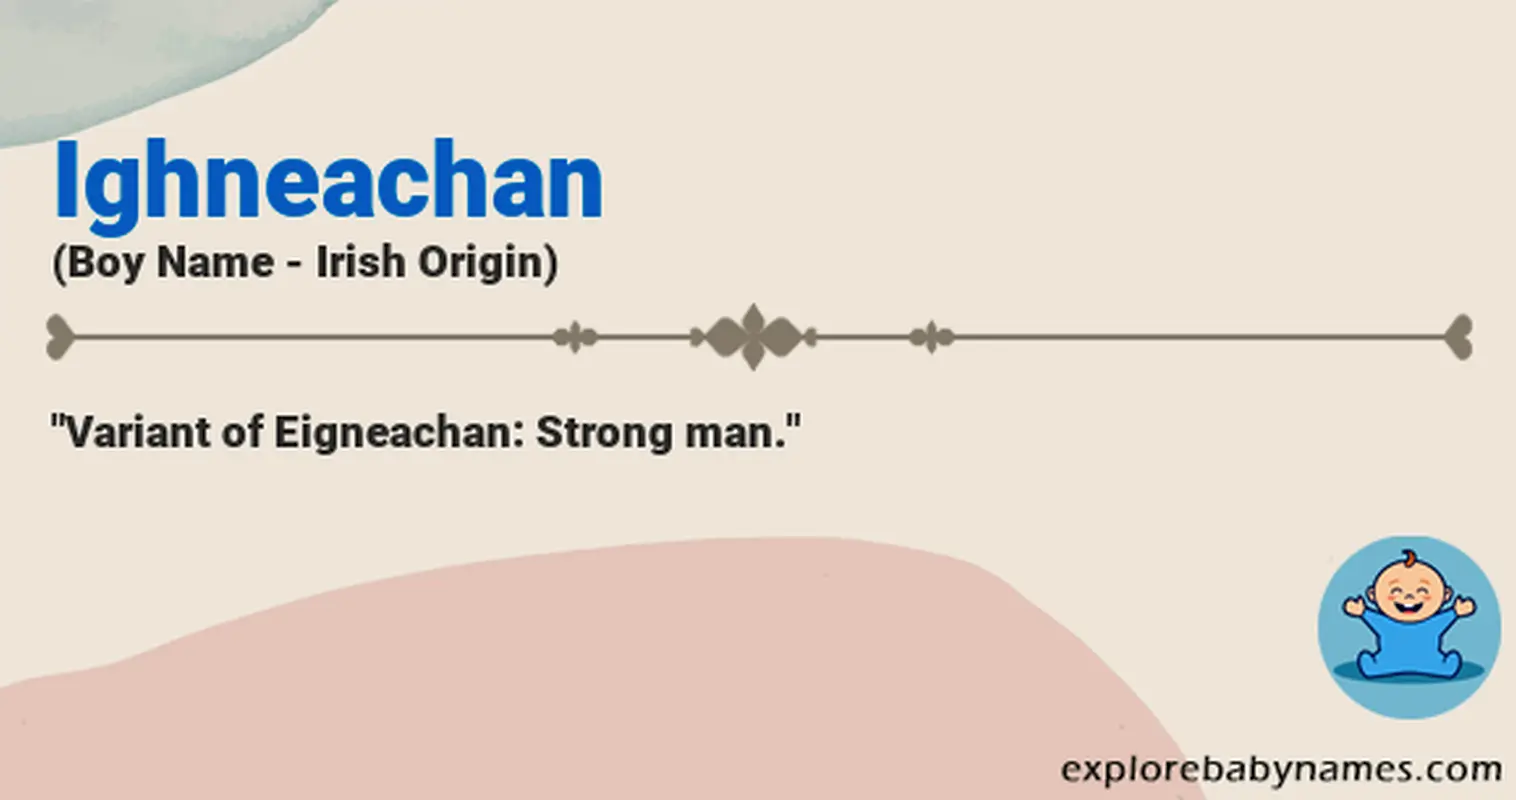 Meaning of Ighneachan